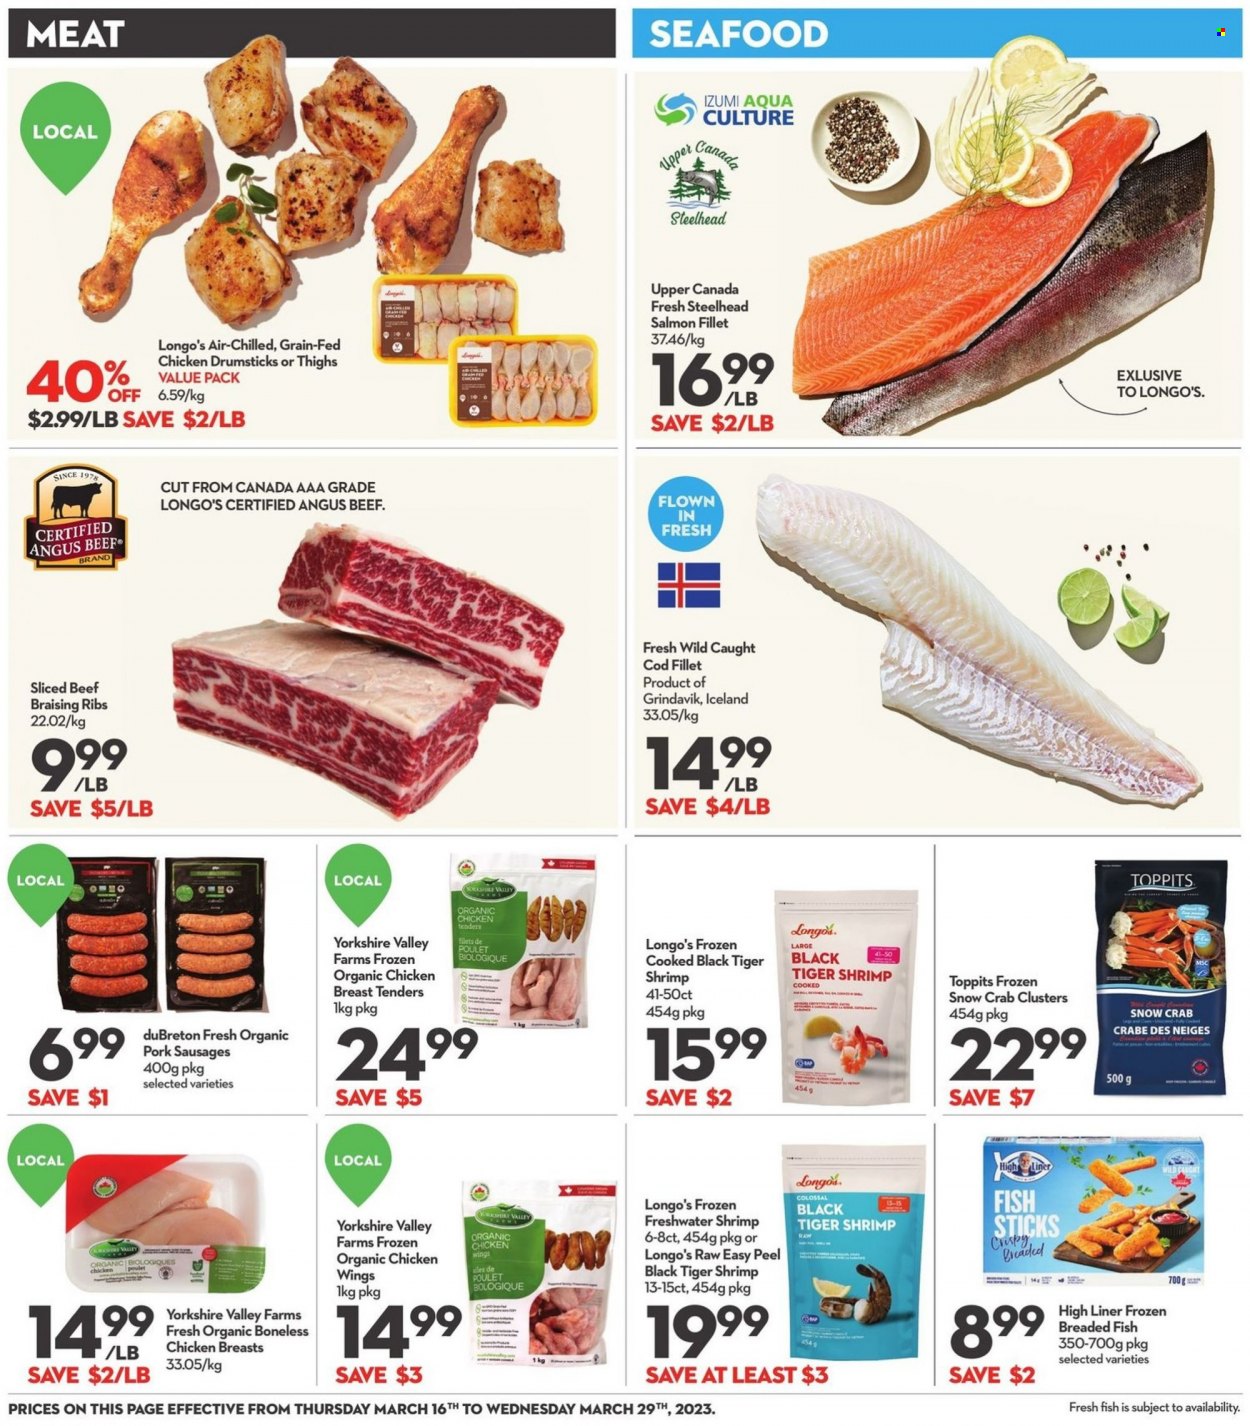 thumbnail - Longo's Flyer - March 16, 2023 - March 29, 2023 - Sales products - cod, salmon, salmon fillet, seafood, crab, fish, shrimps, fish fingers, fish sticks, chicken tenders, breaded fish, sausage, chicken wings, chicken breasts, chicken drumsticks, chicken, beef meat, ribs. Page 9.